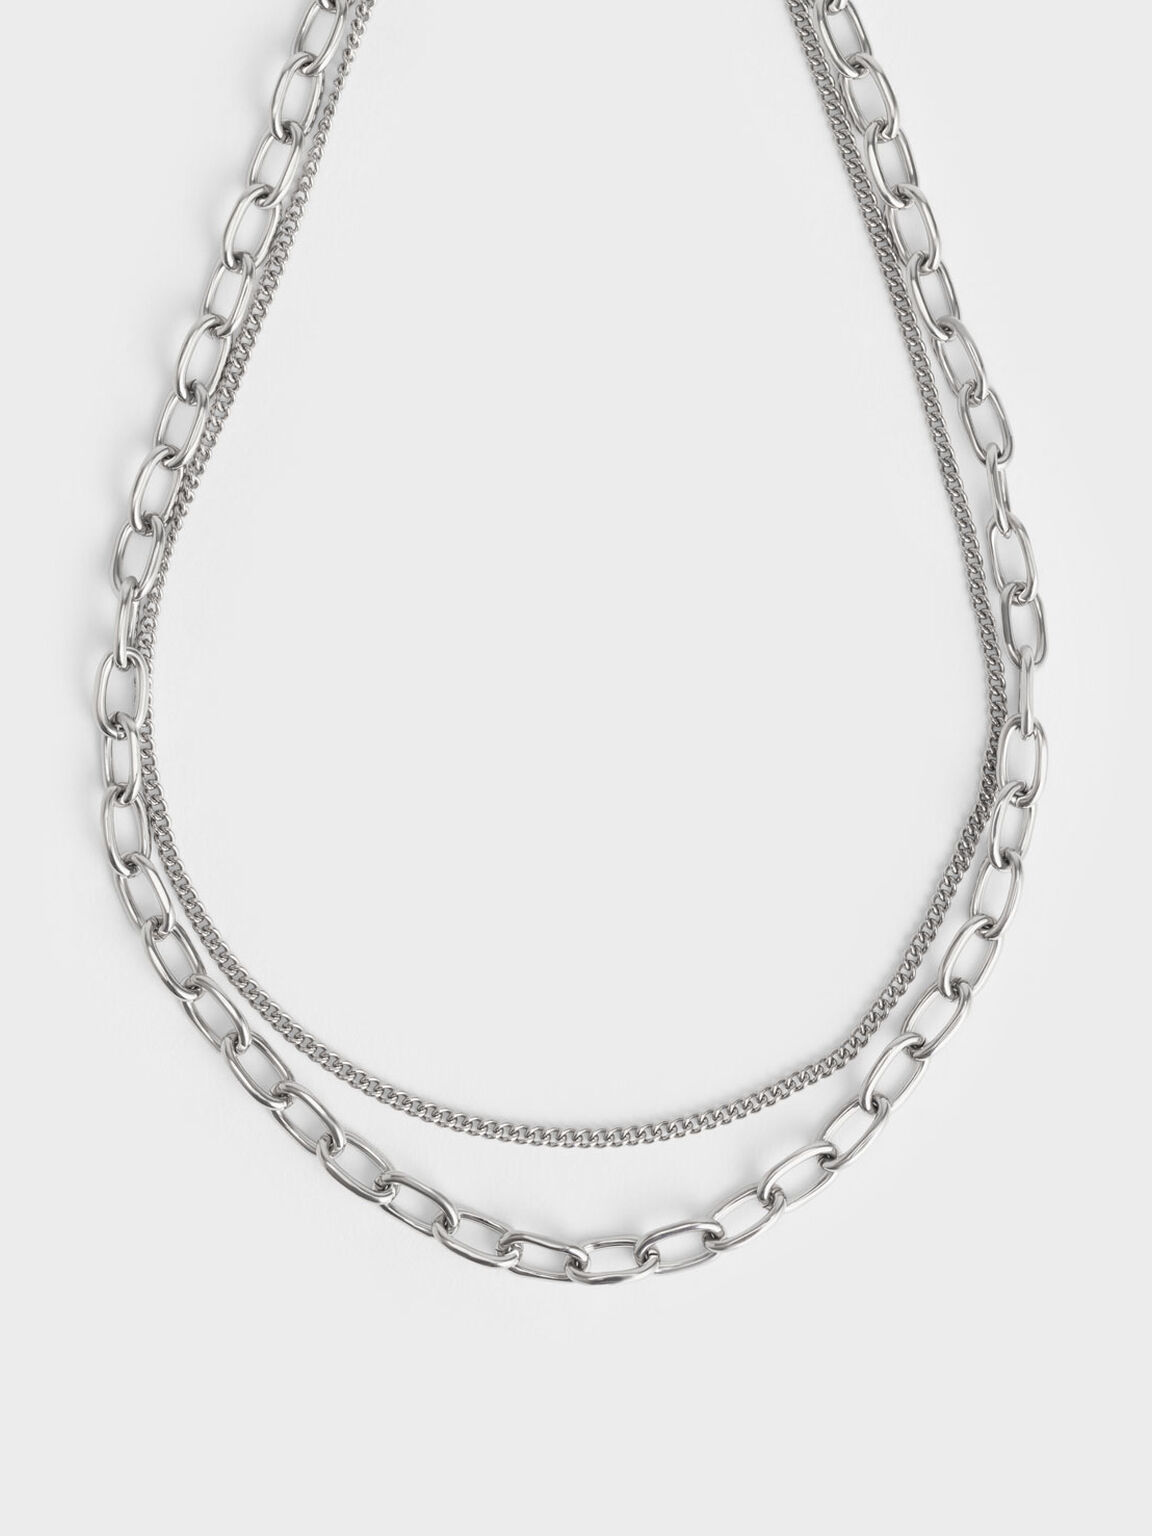 Double Chain Necklace, Silver, hi-res